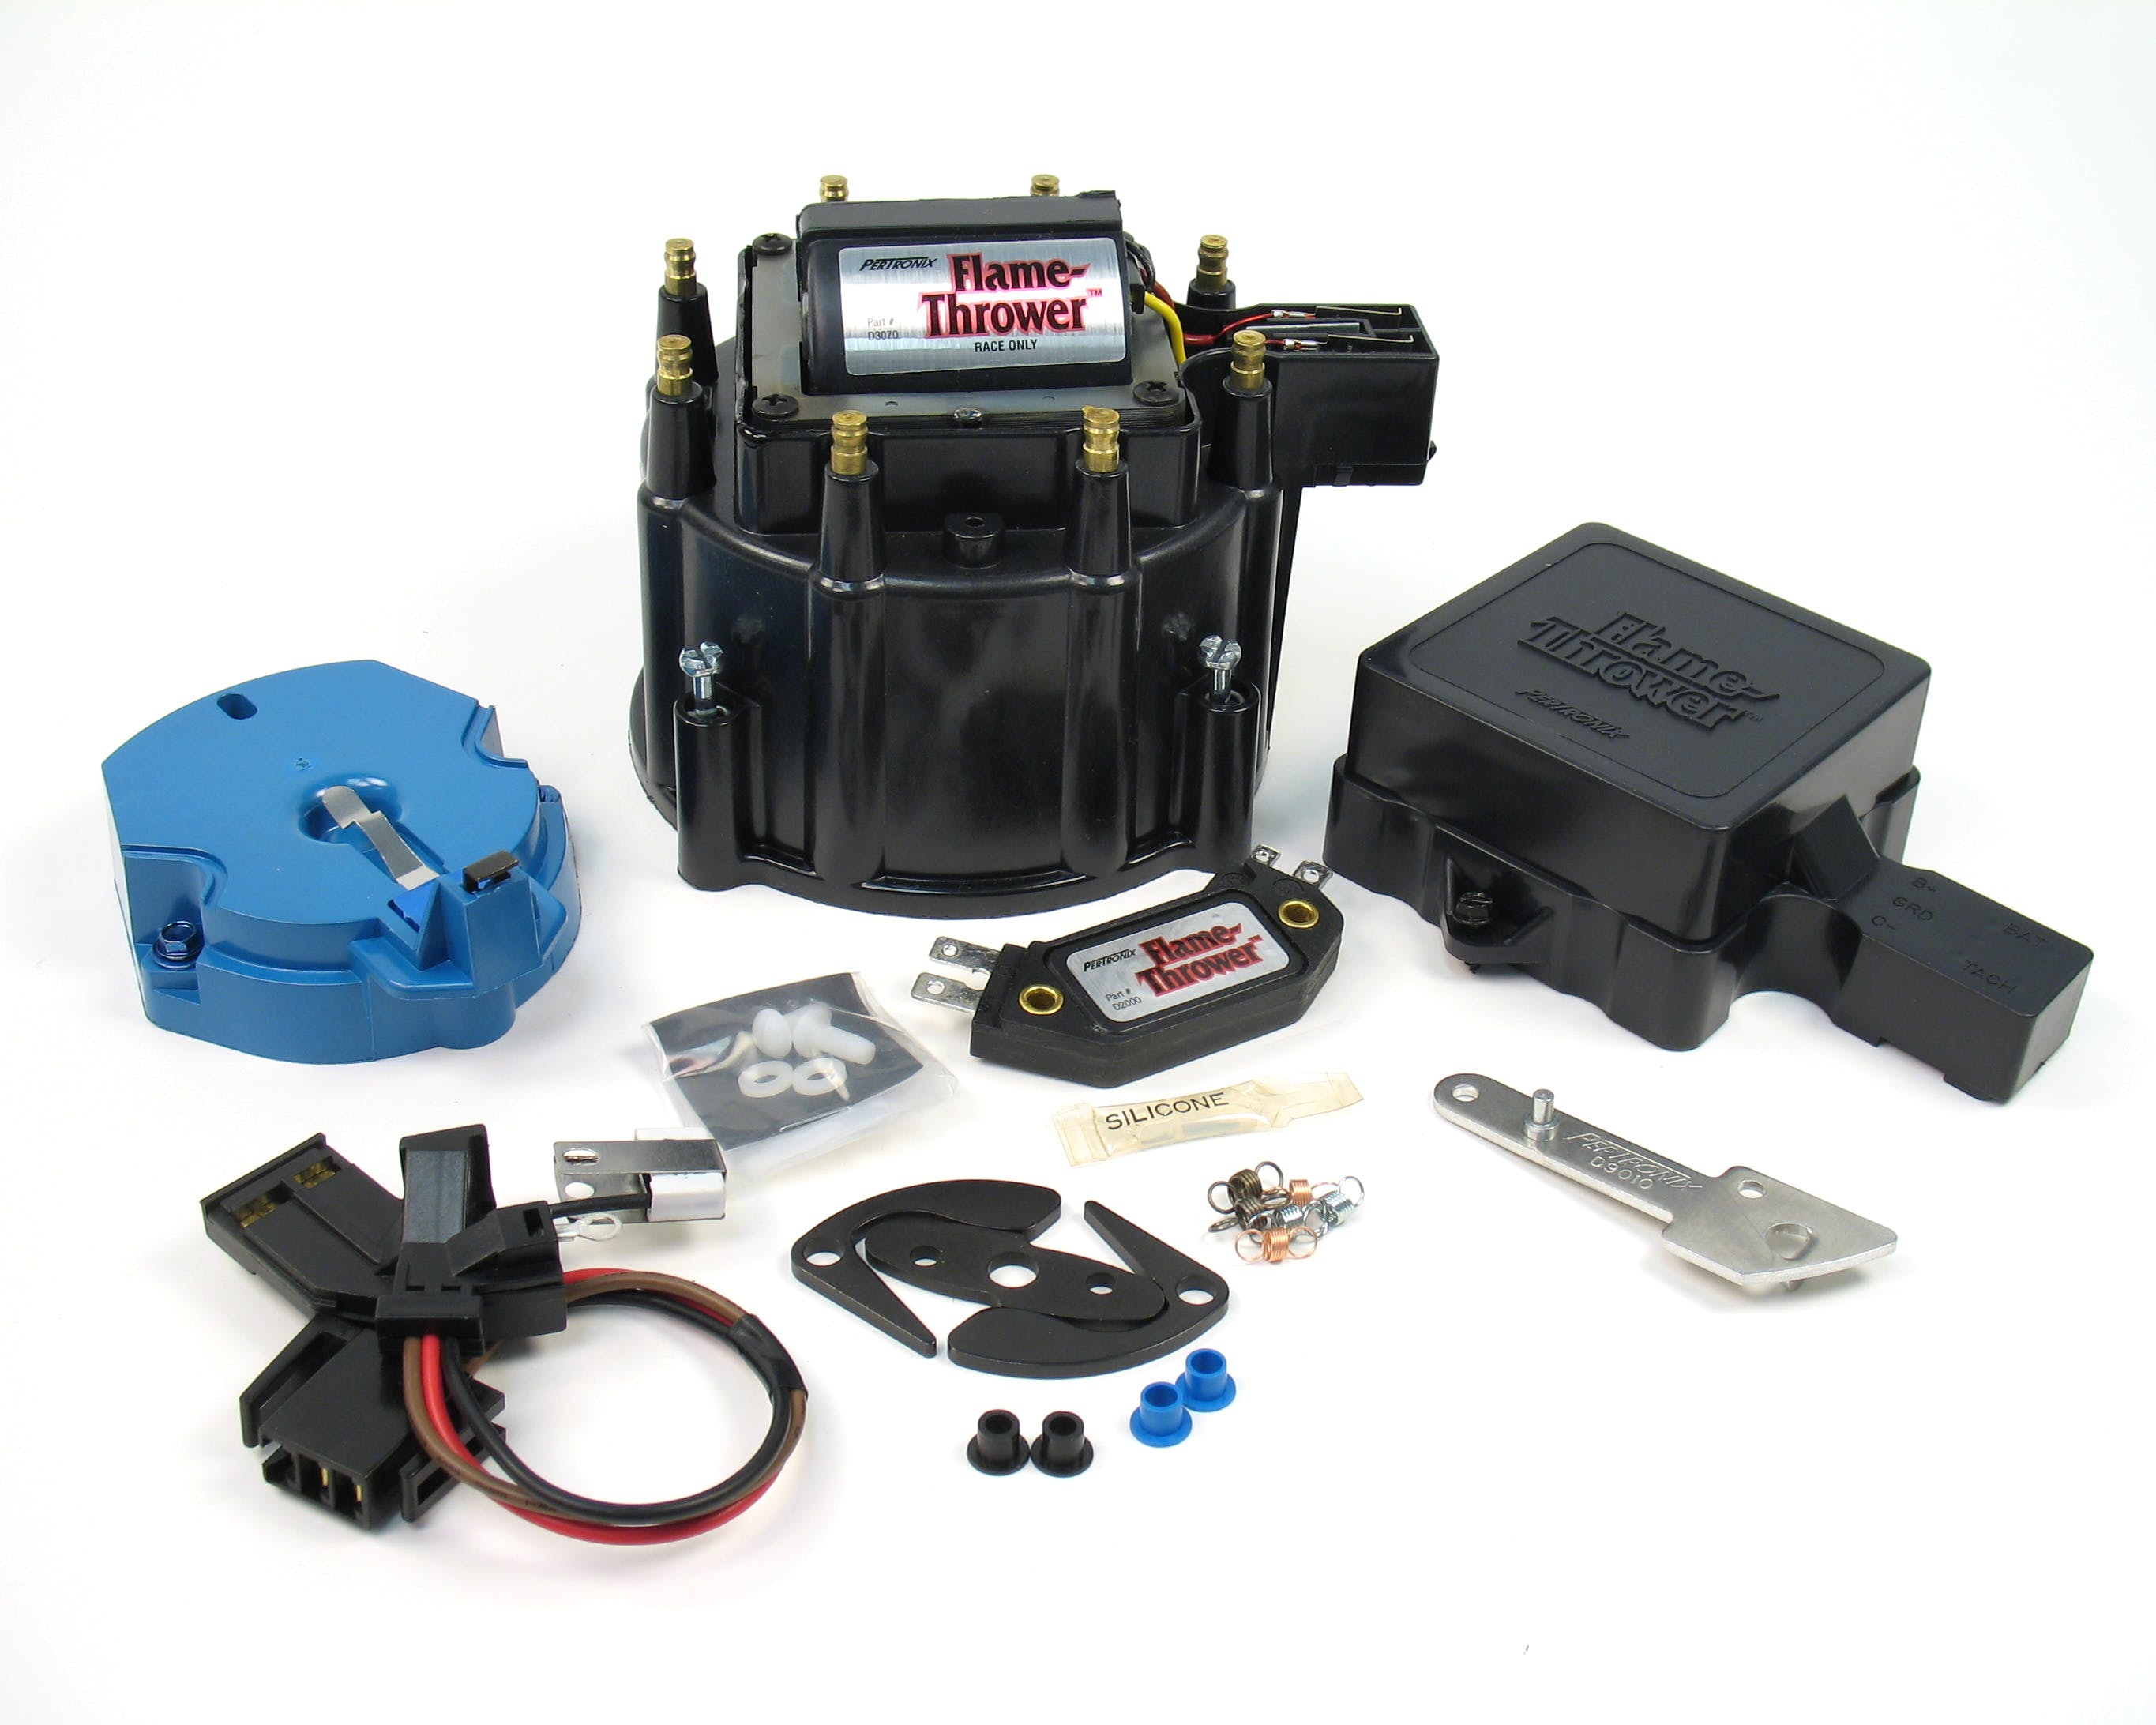 PerTronix D8070 PerTronix D8070 Flame-Thrower HEI Race Chevy Tune Up Kit Black cap